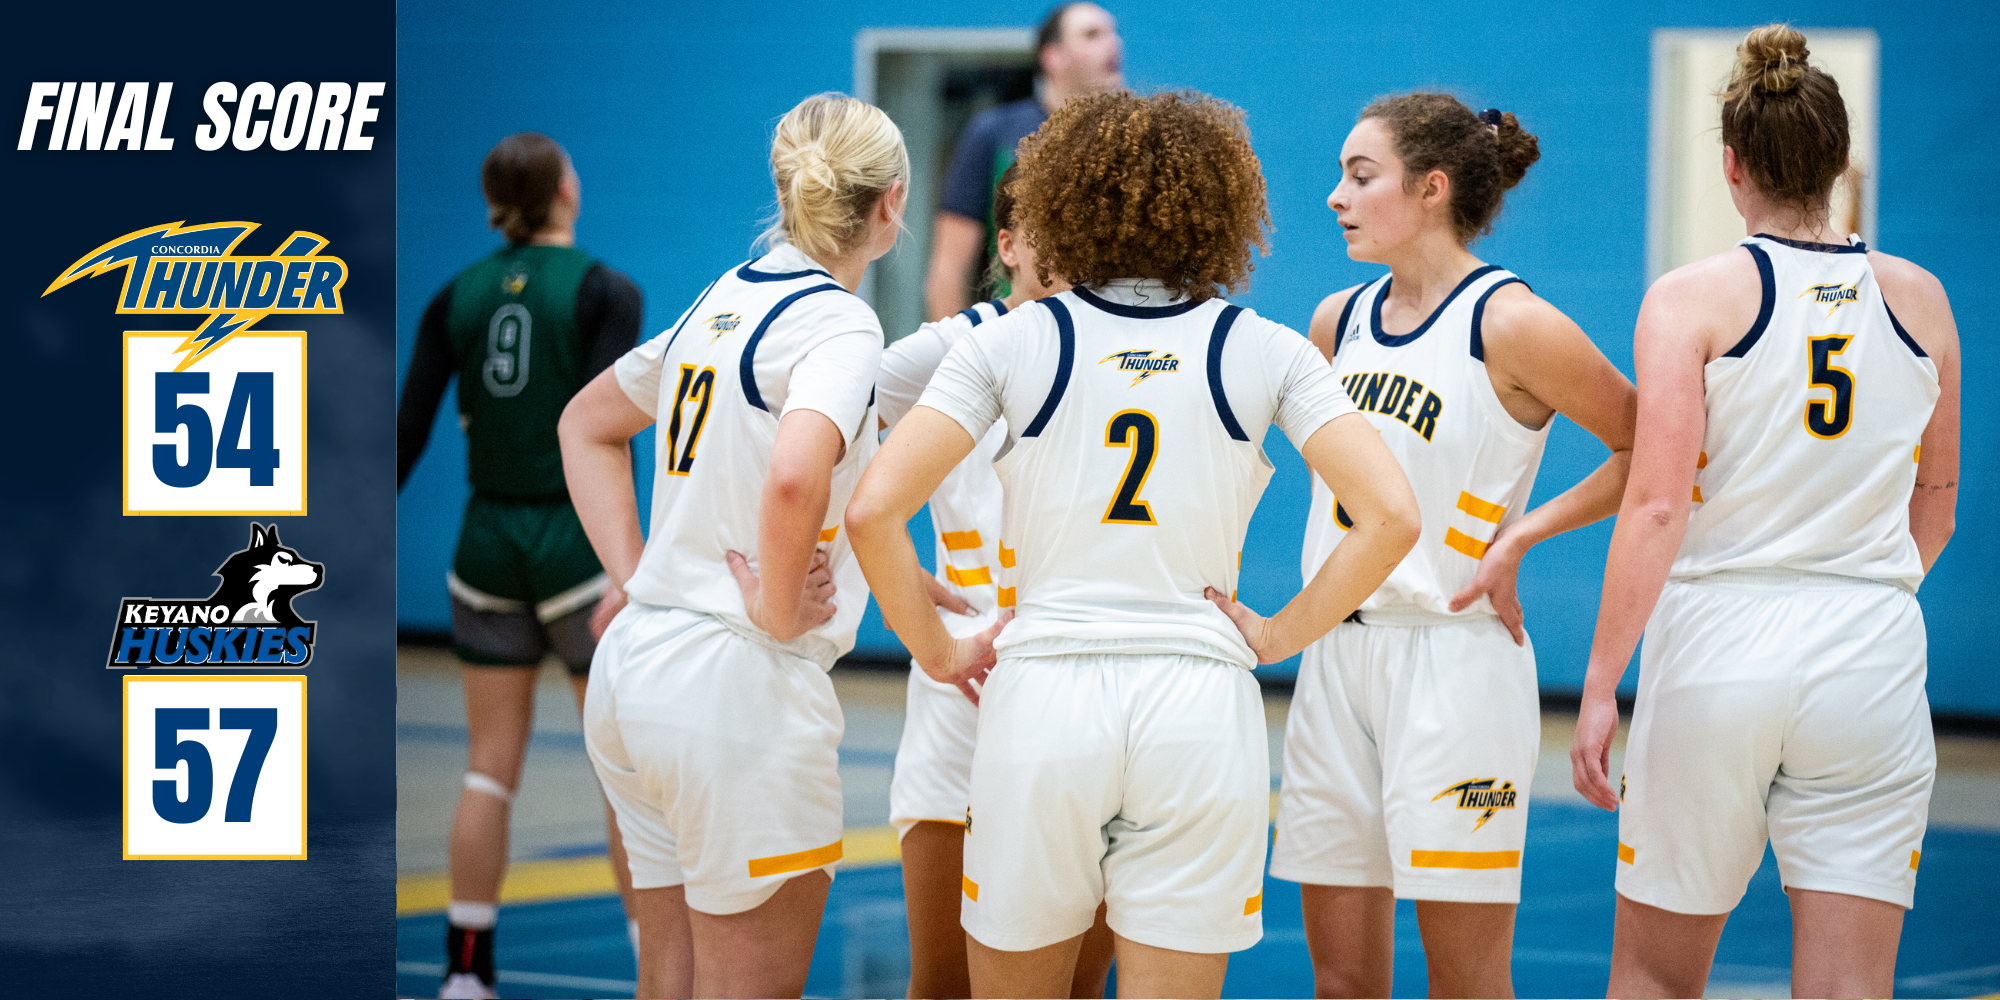 Thunder's Fight Falls Short: Concordia's Fierce Battle Ends in Narrow Defeat Against Keyano College